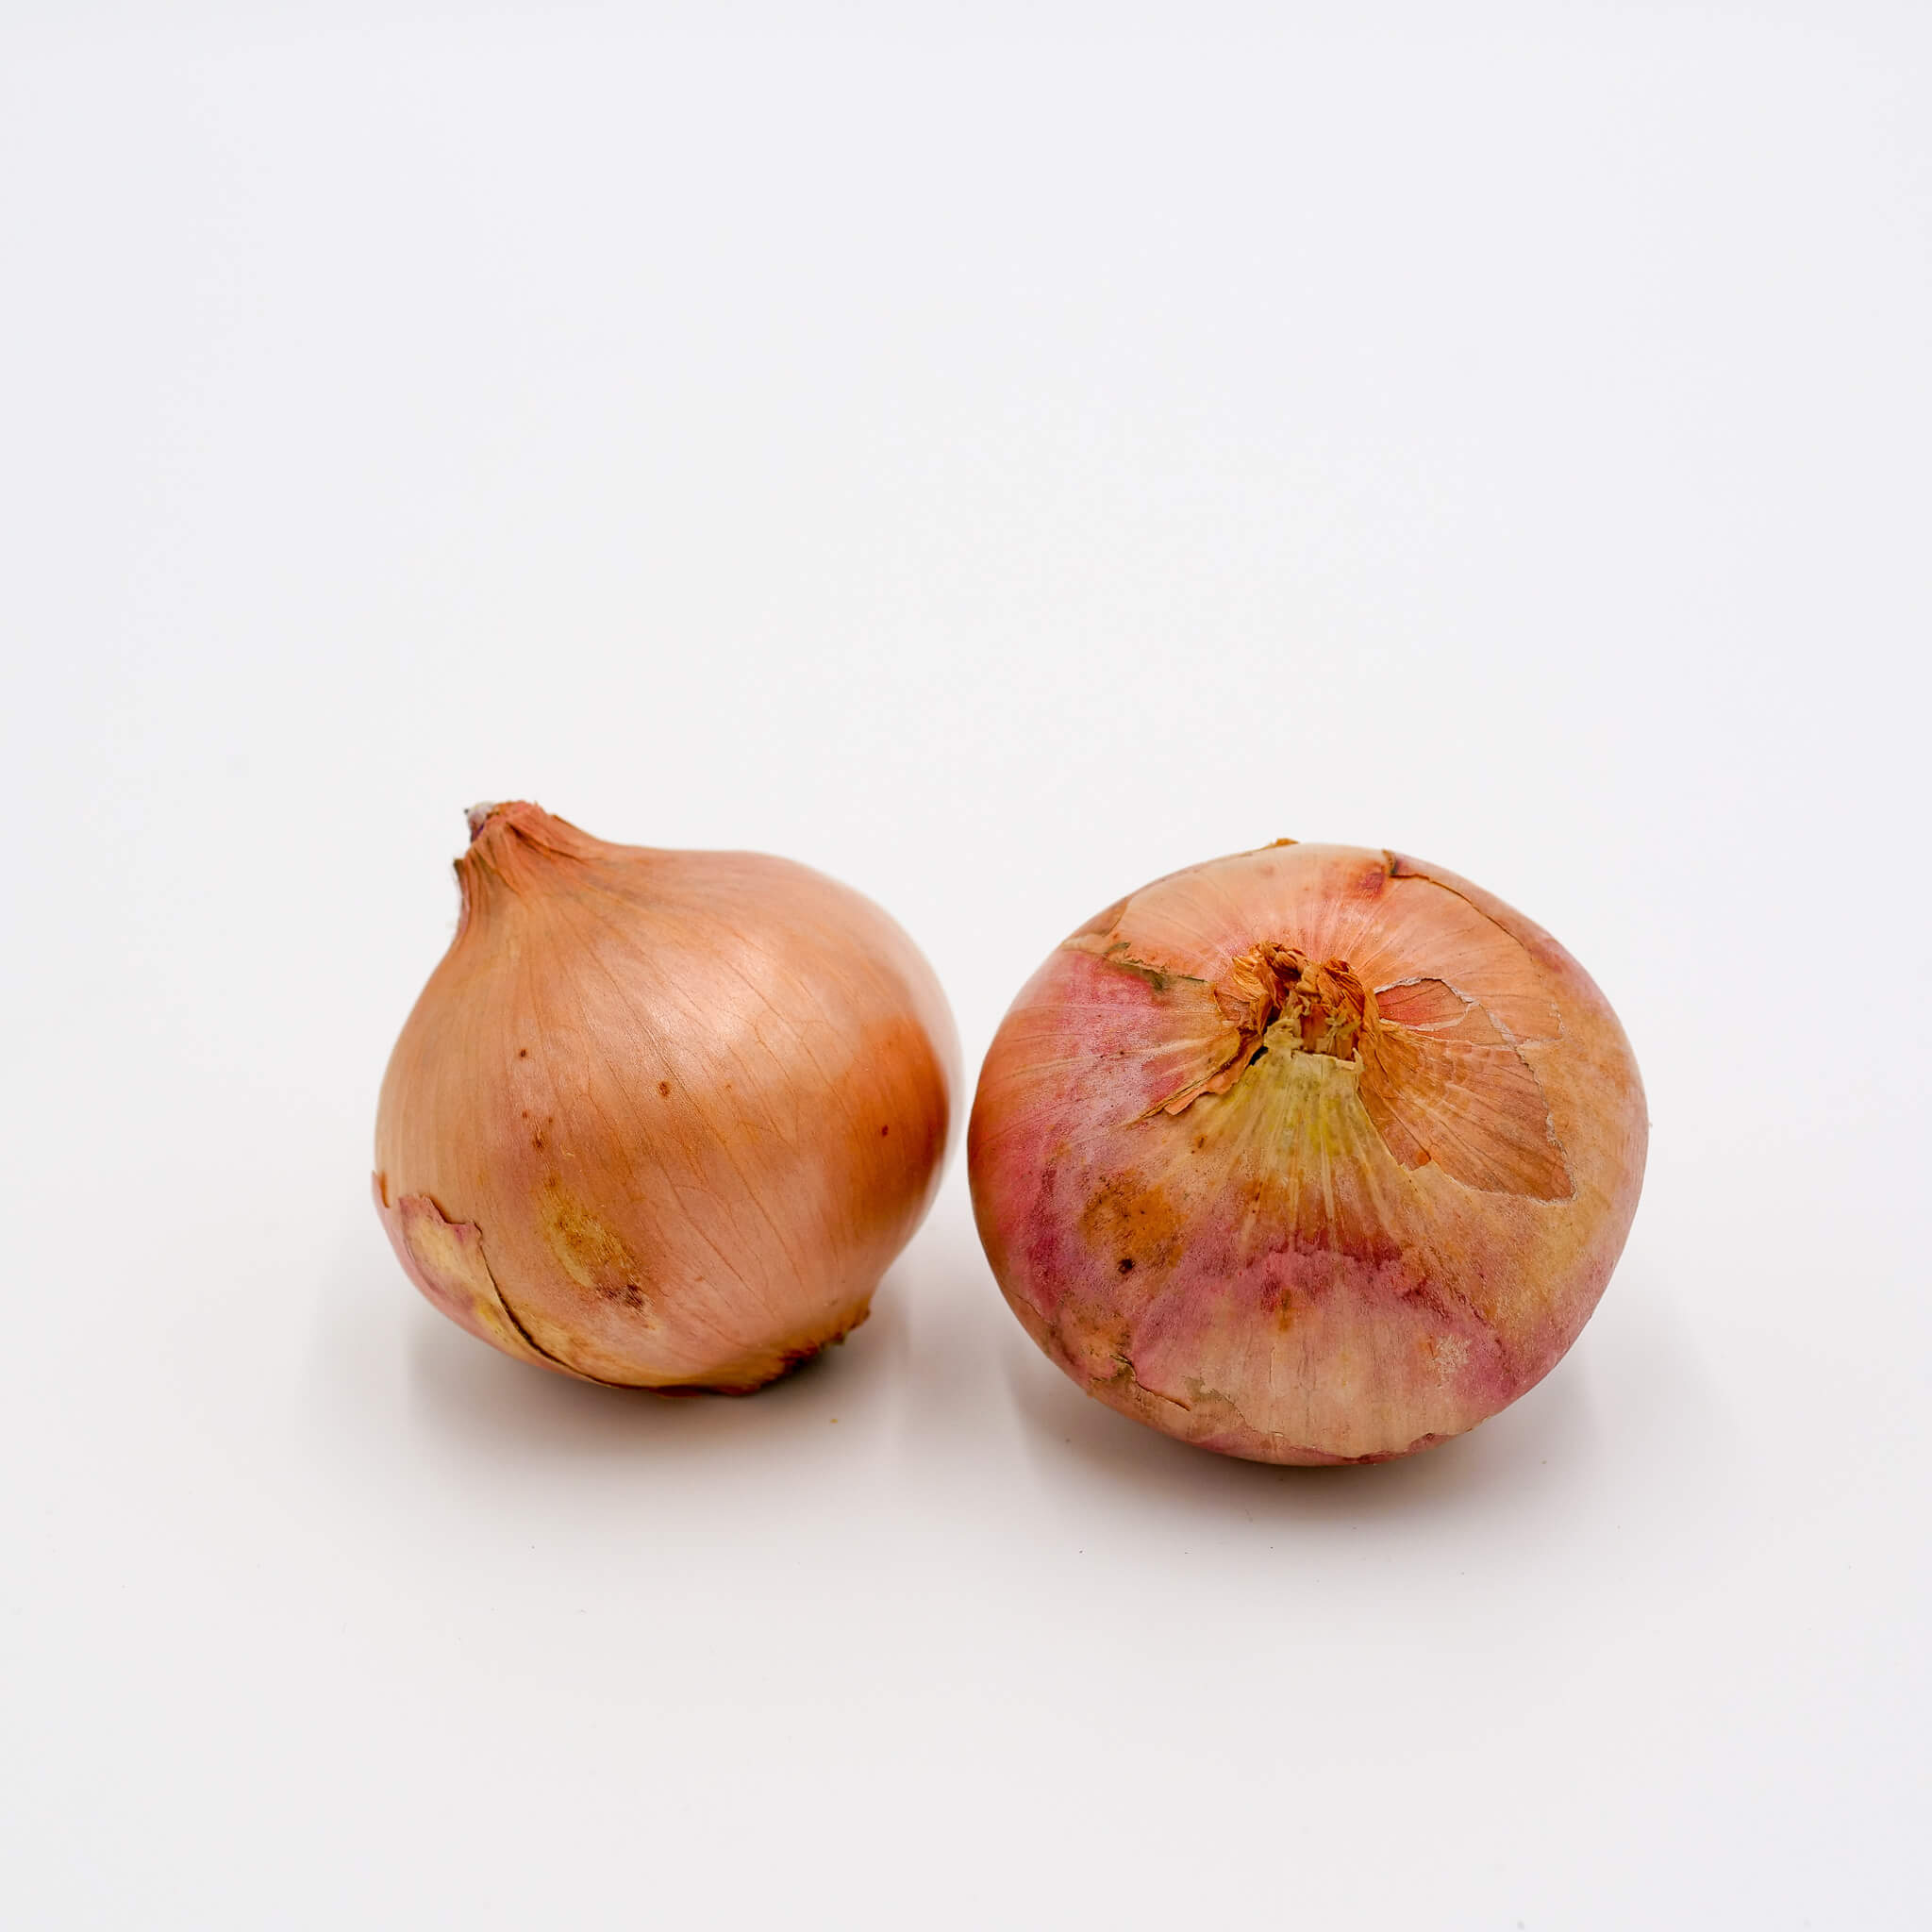 Pink onion from Brittany - La légumière - the specialist in Breton  vegetables!